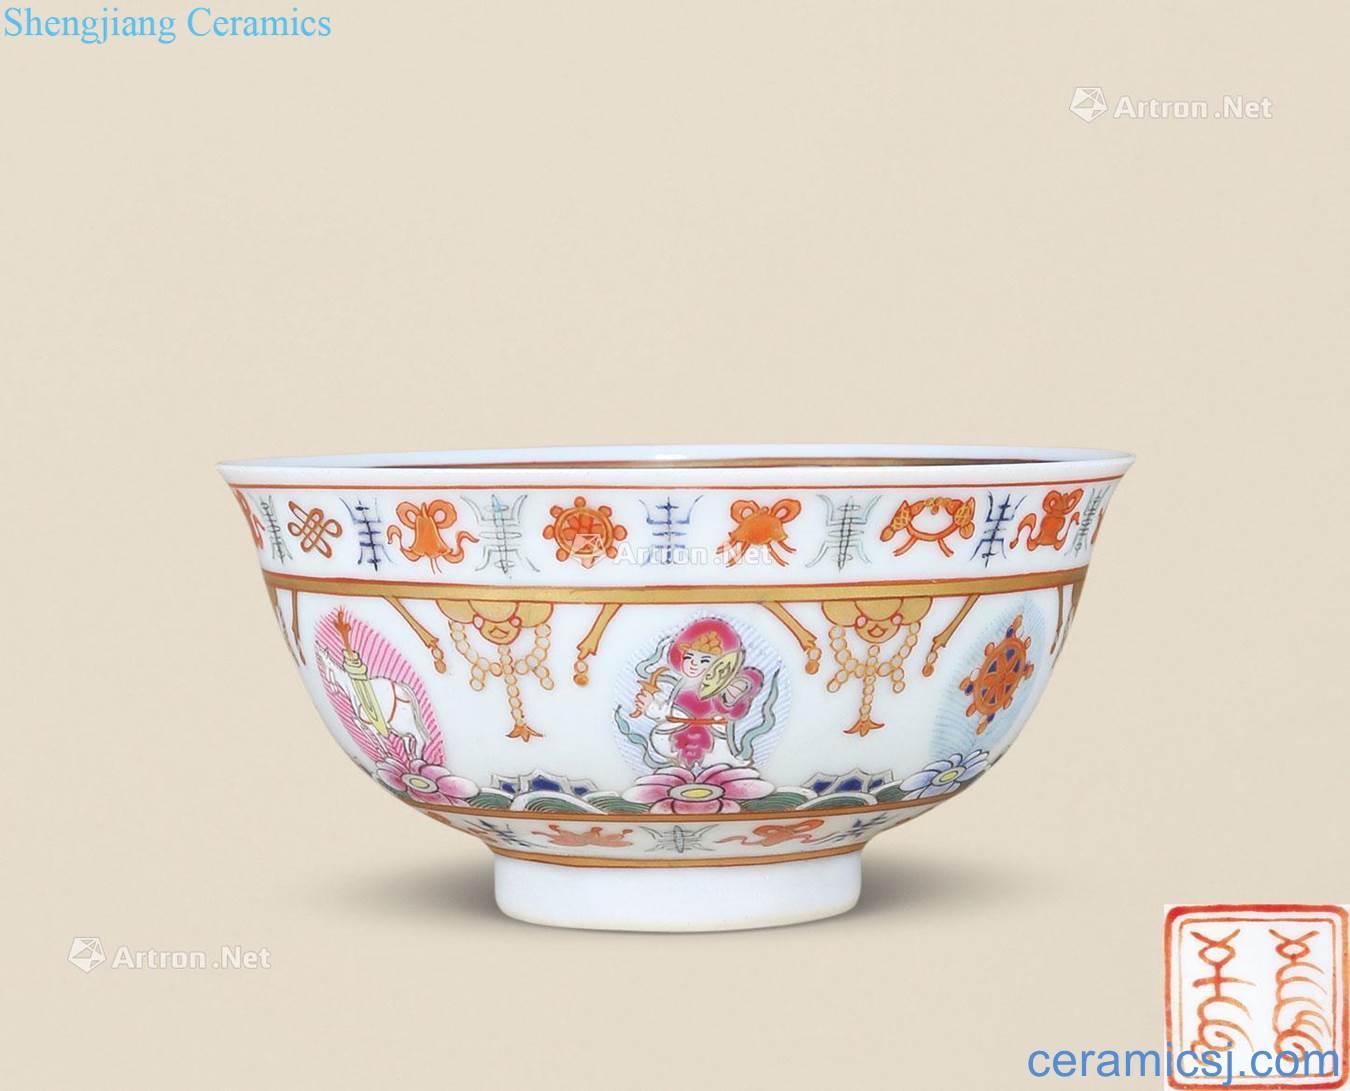 In late qing pastel wreaths all green-splashed bowls